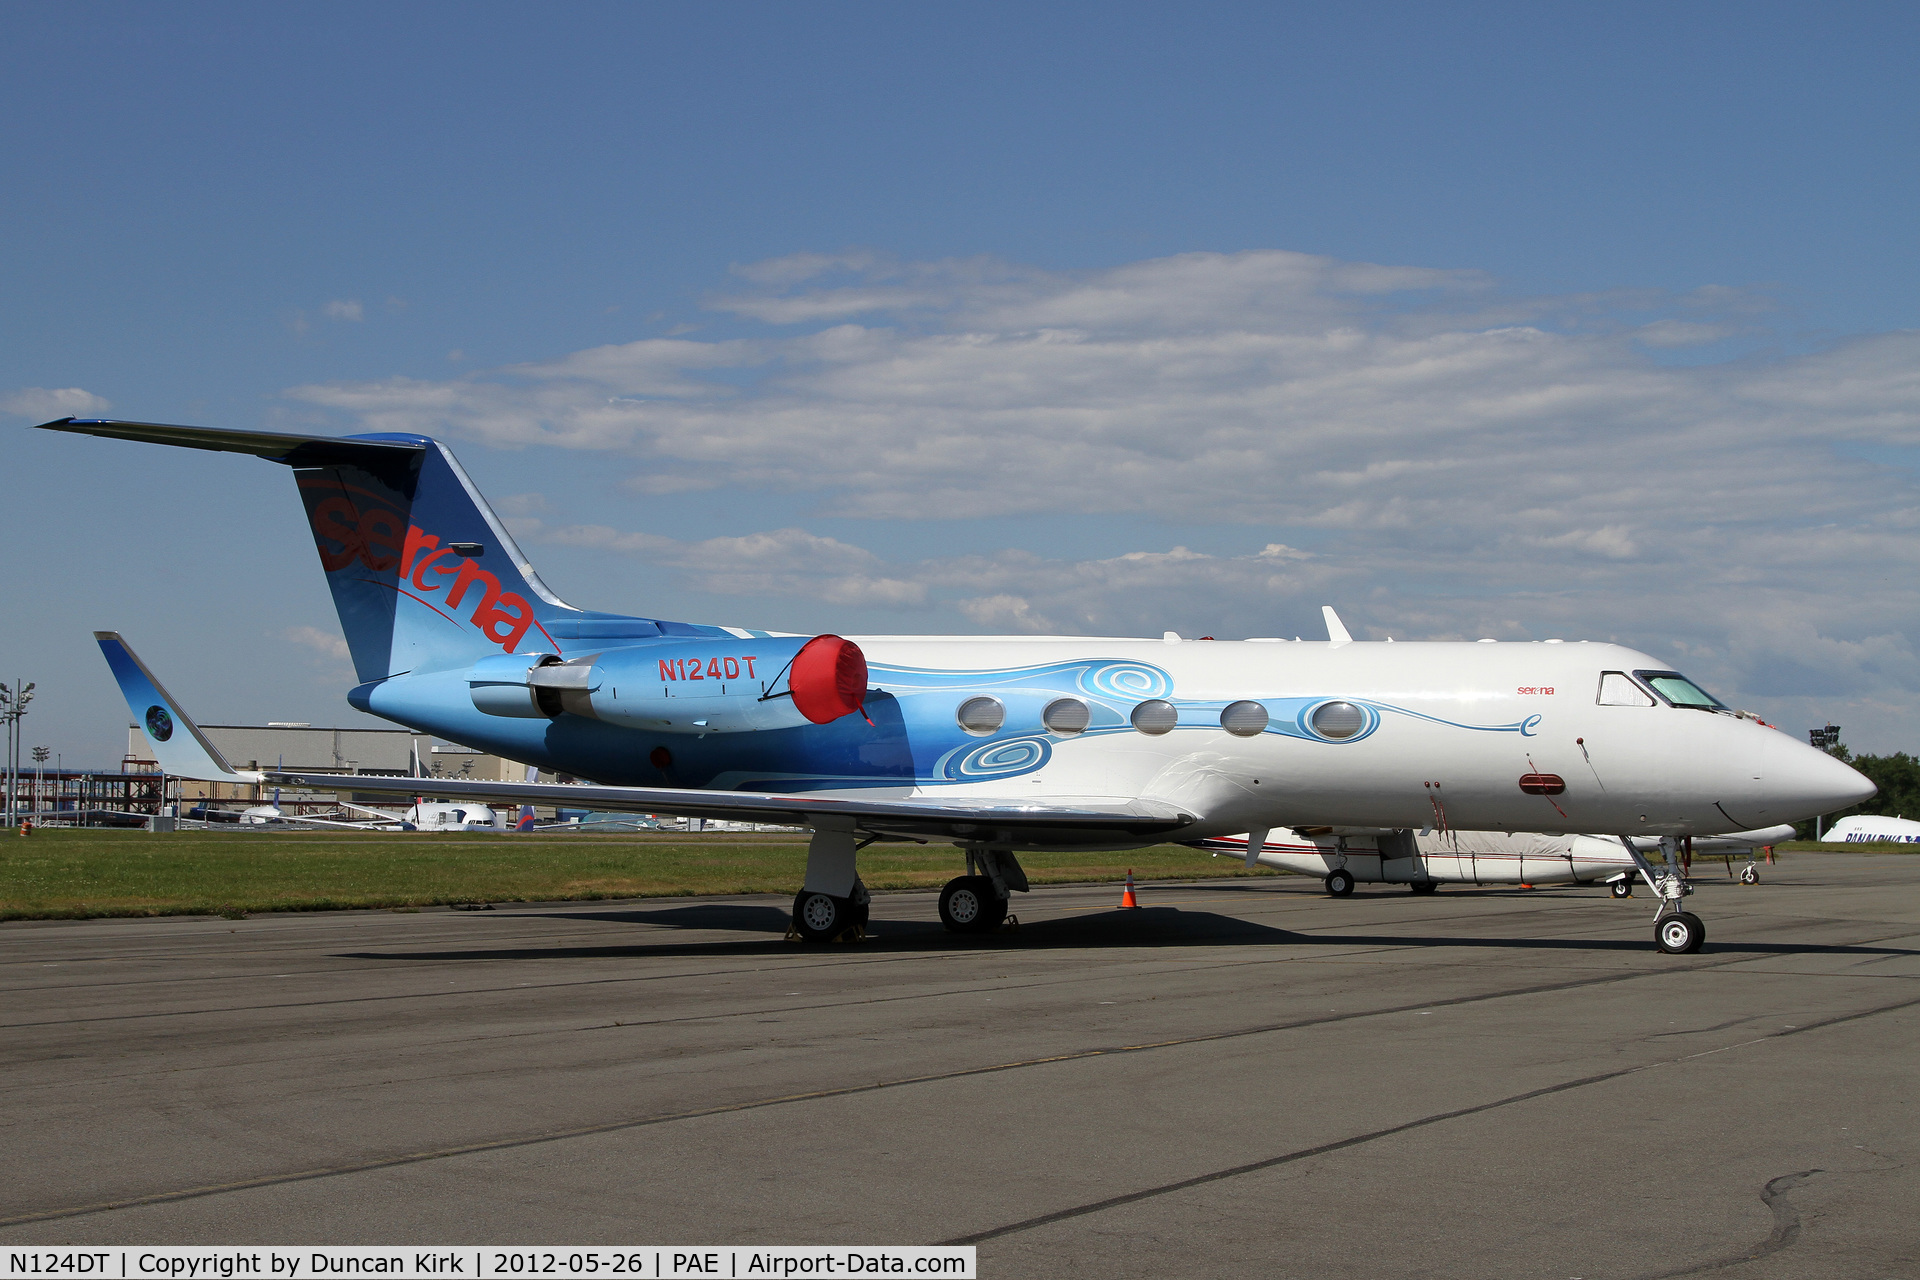 N124DT, 1983 Gulfstream American G-1159A Gulfstream III C/N 390, What a beauty this is!!!